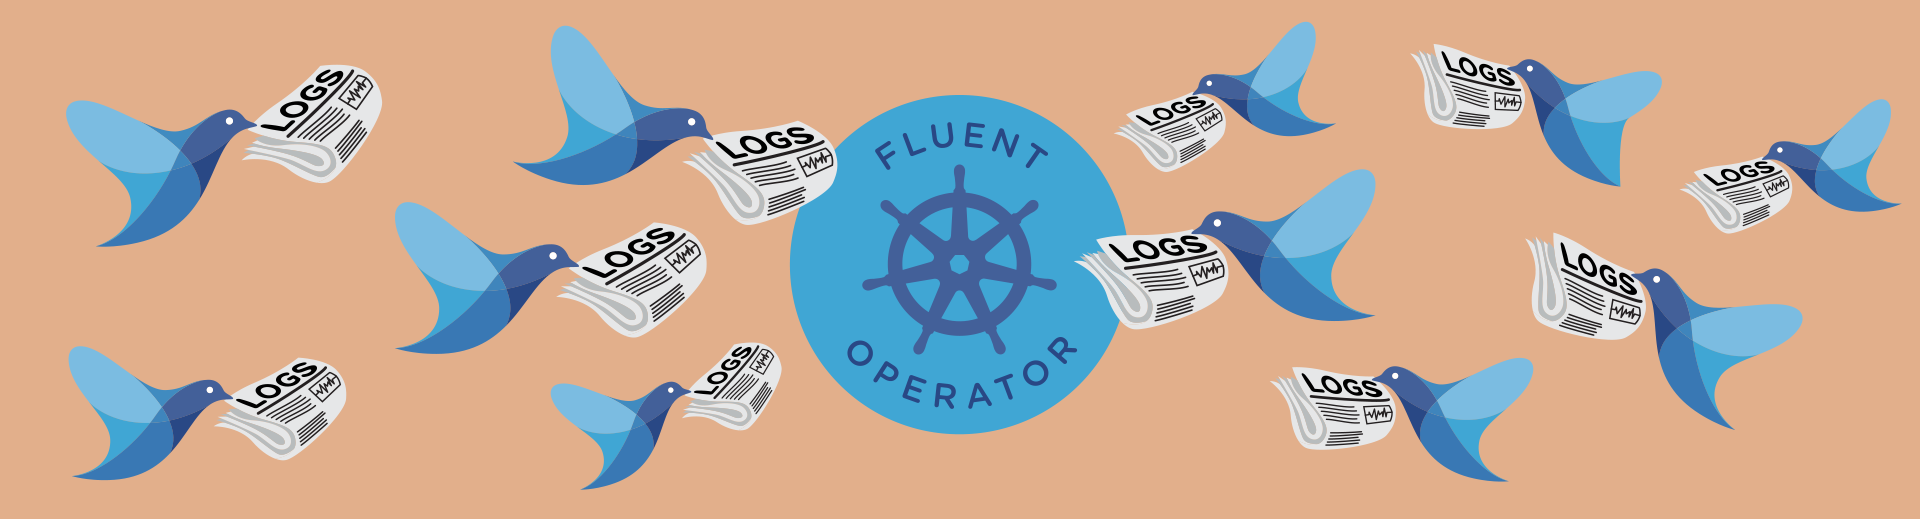 A flock of birds carry newspapers labelled 'logs' towards a circle with 'Fluent Operator' and the Kubernetes logo